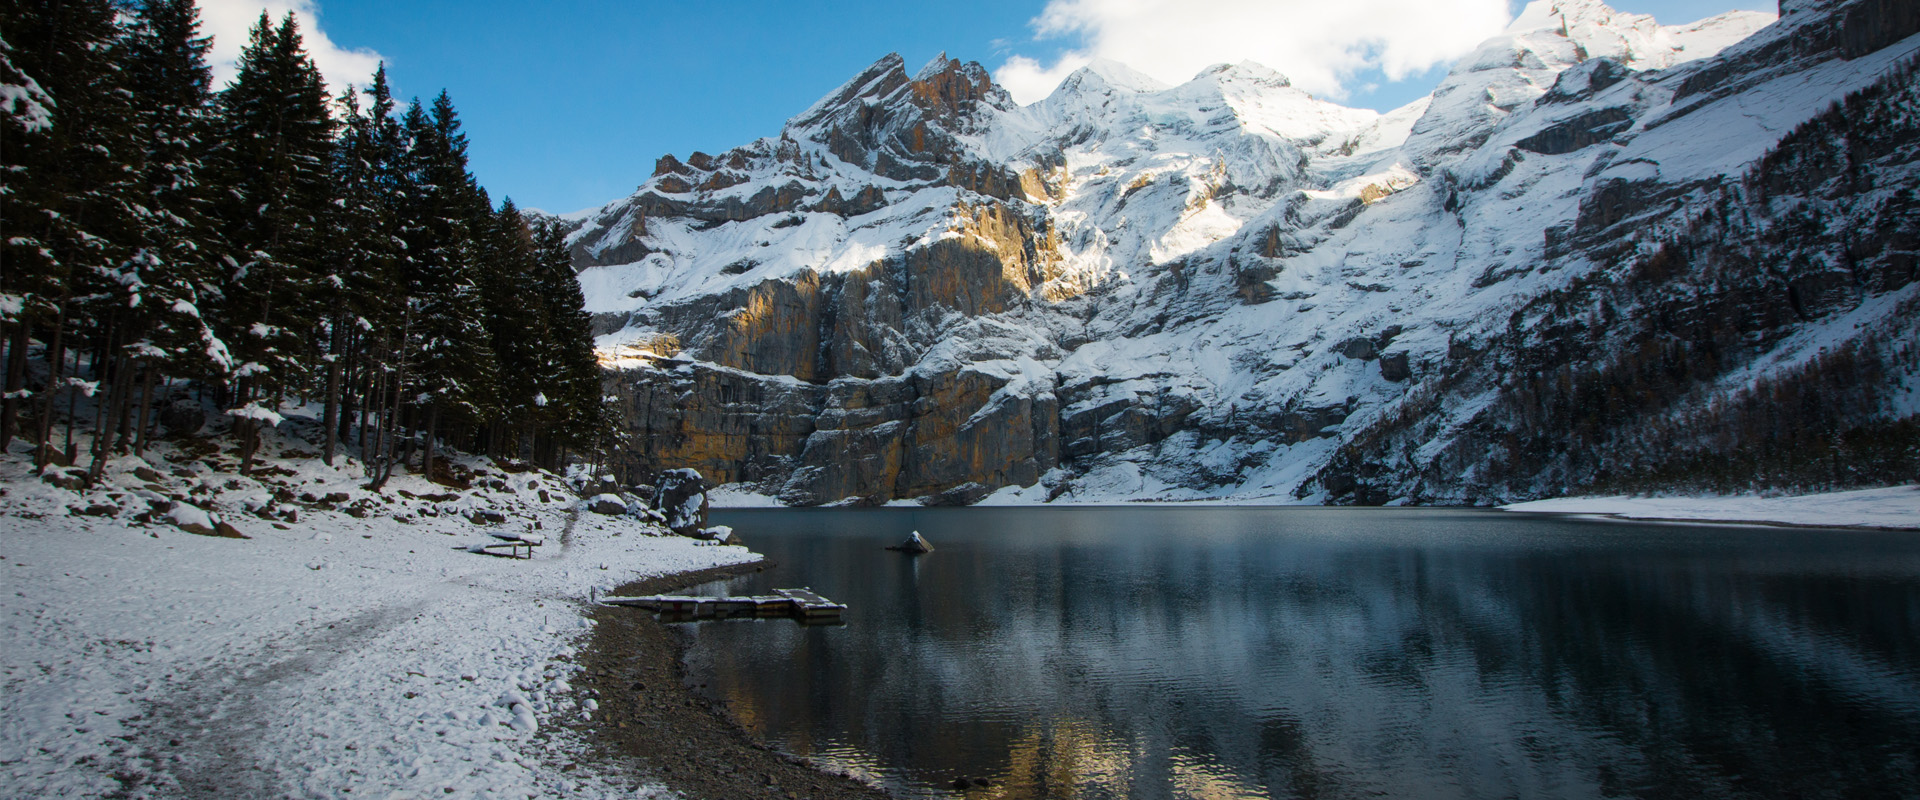 Hiking to Oeschinen Lake in the Swiss Alps in Winter